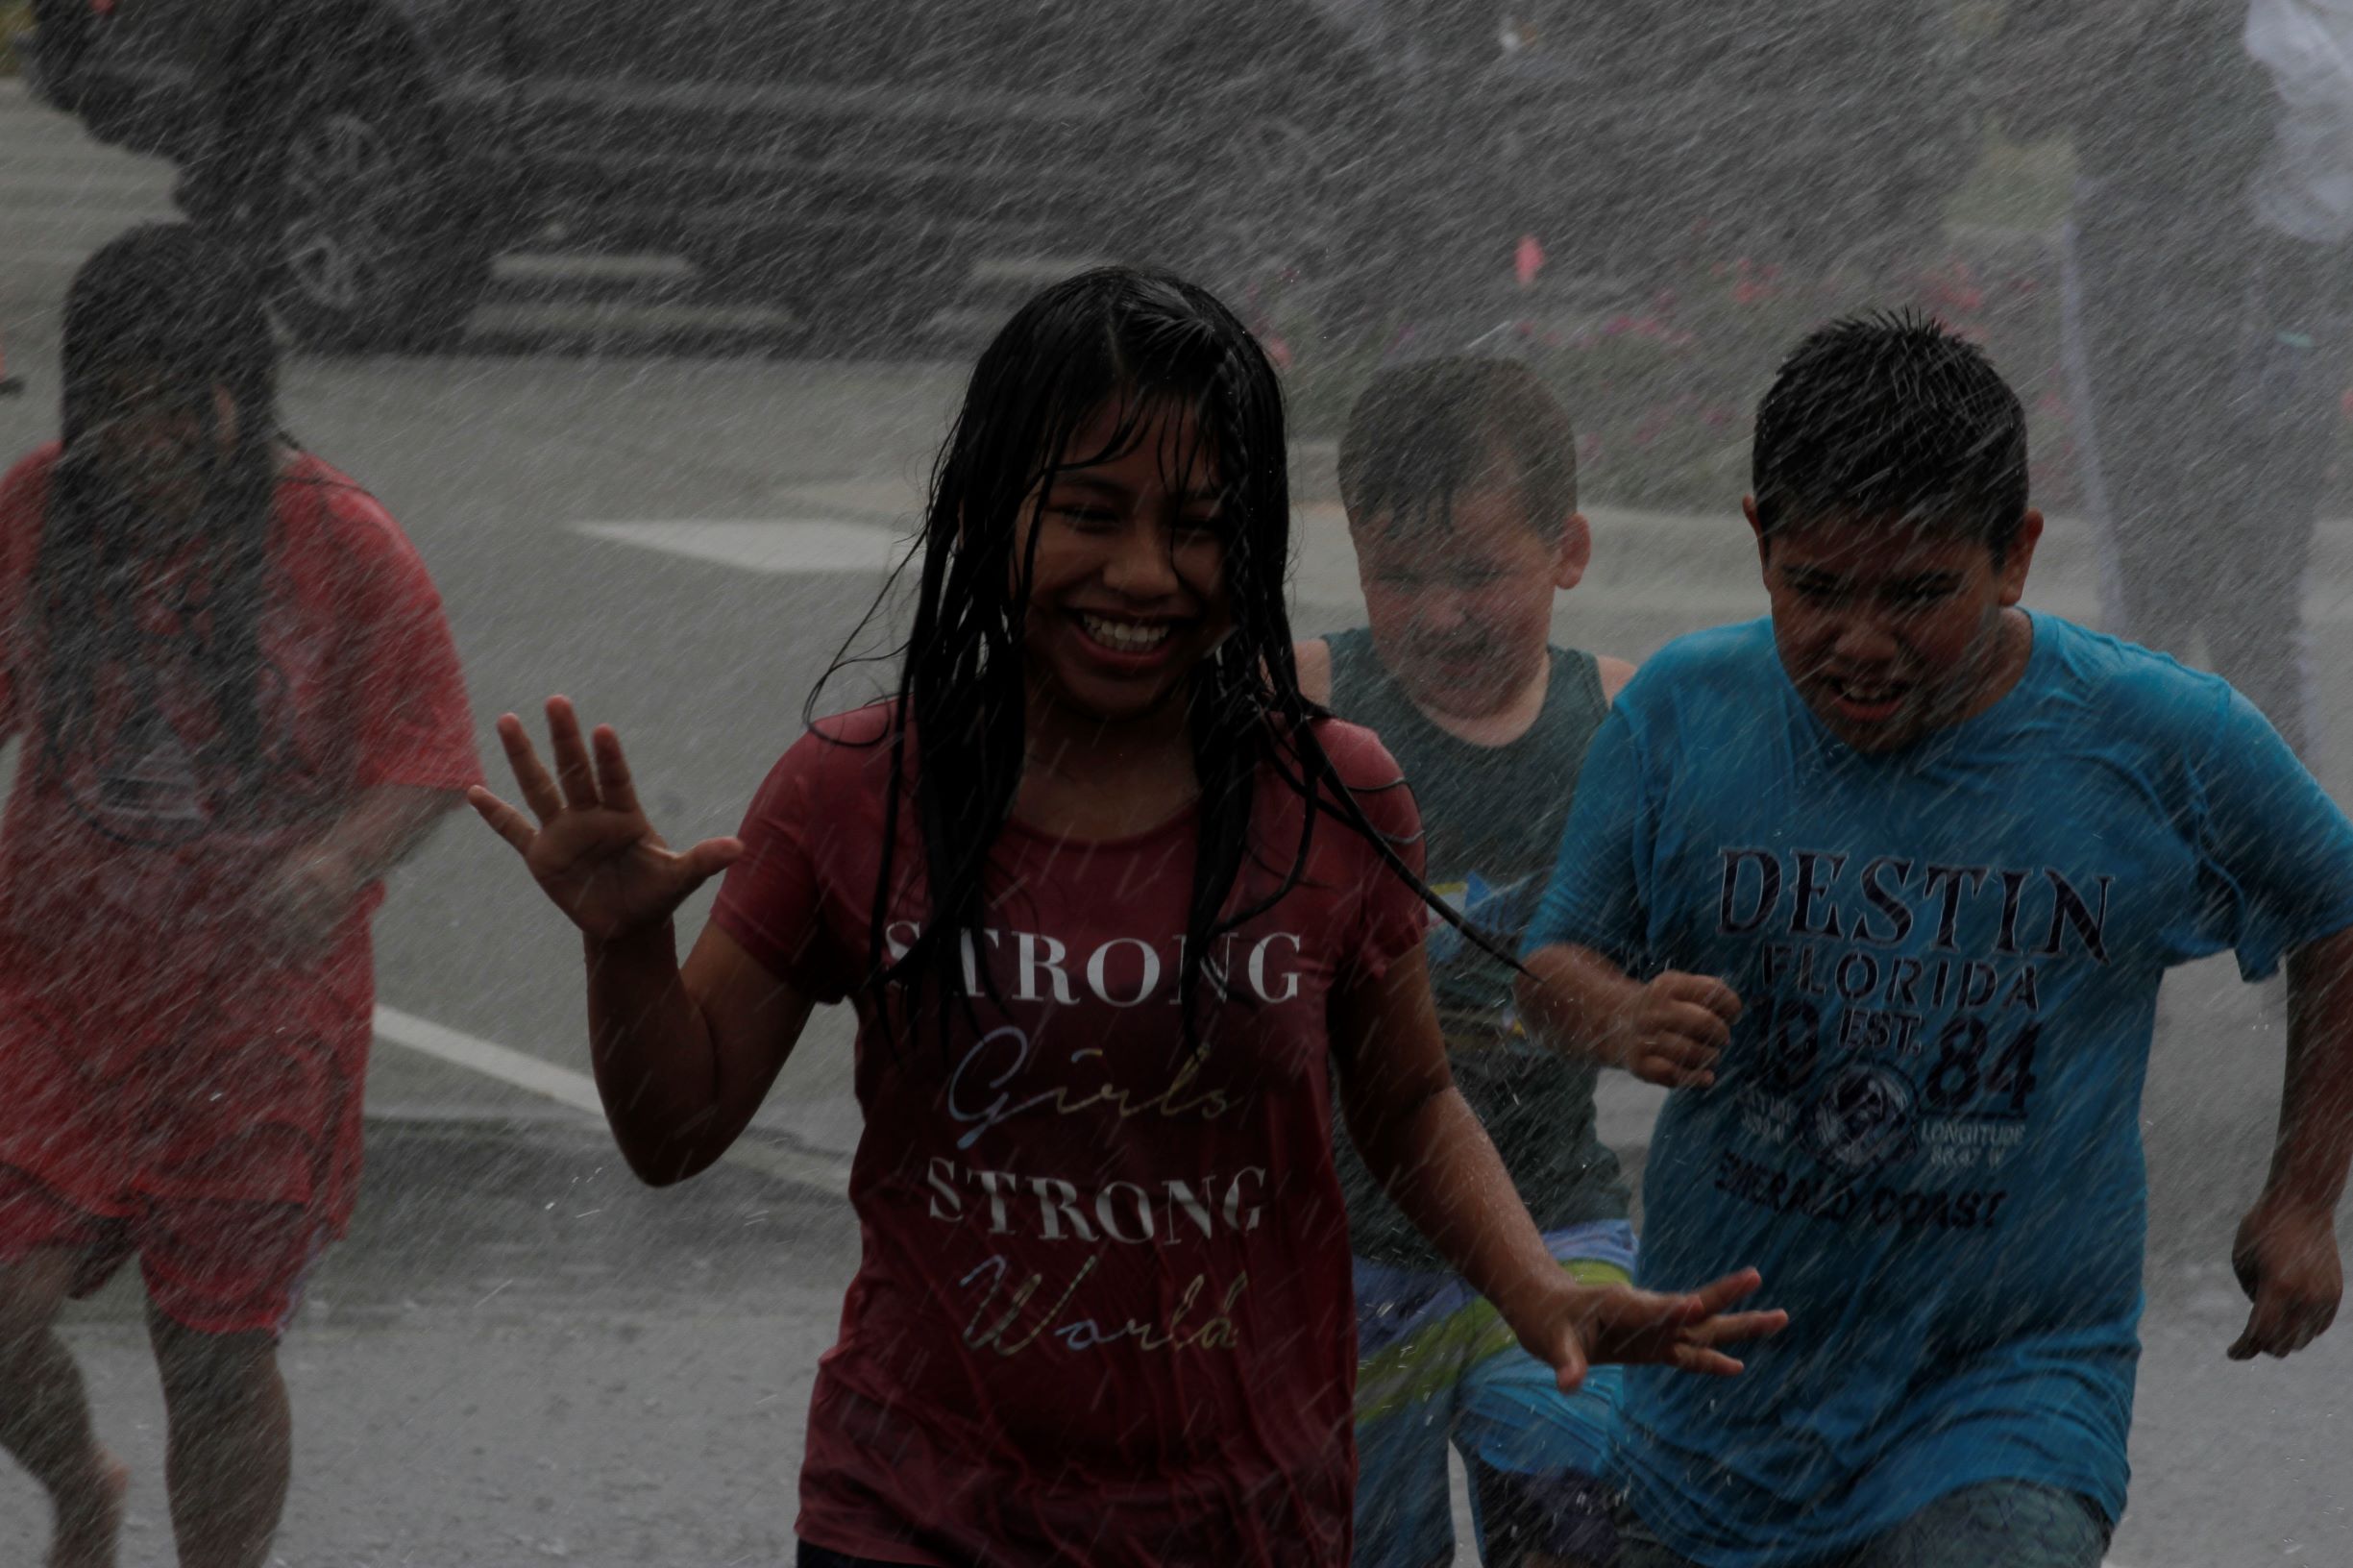 Sprinkler Fun Day Brings Relief From The Heat; Cooler Wetter Weather Ahead [Photo Gallery]